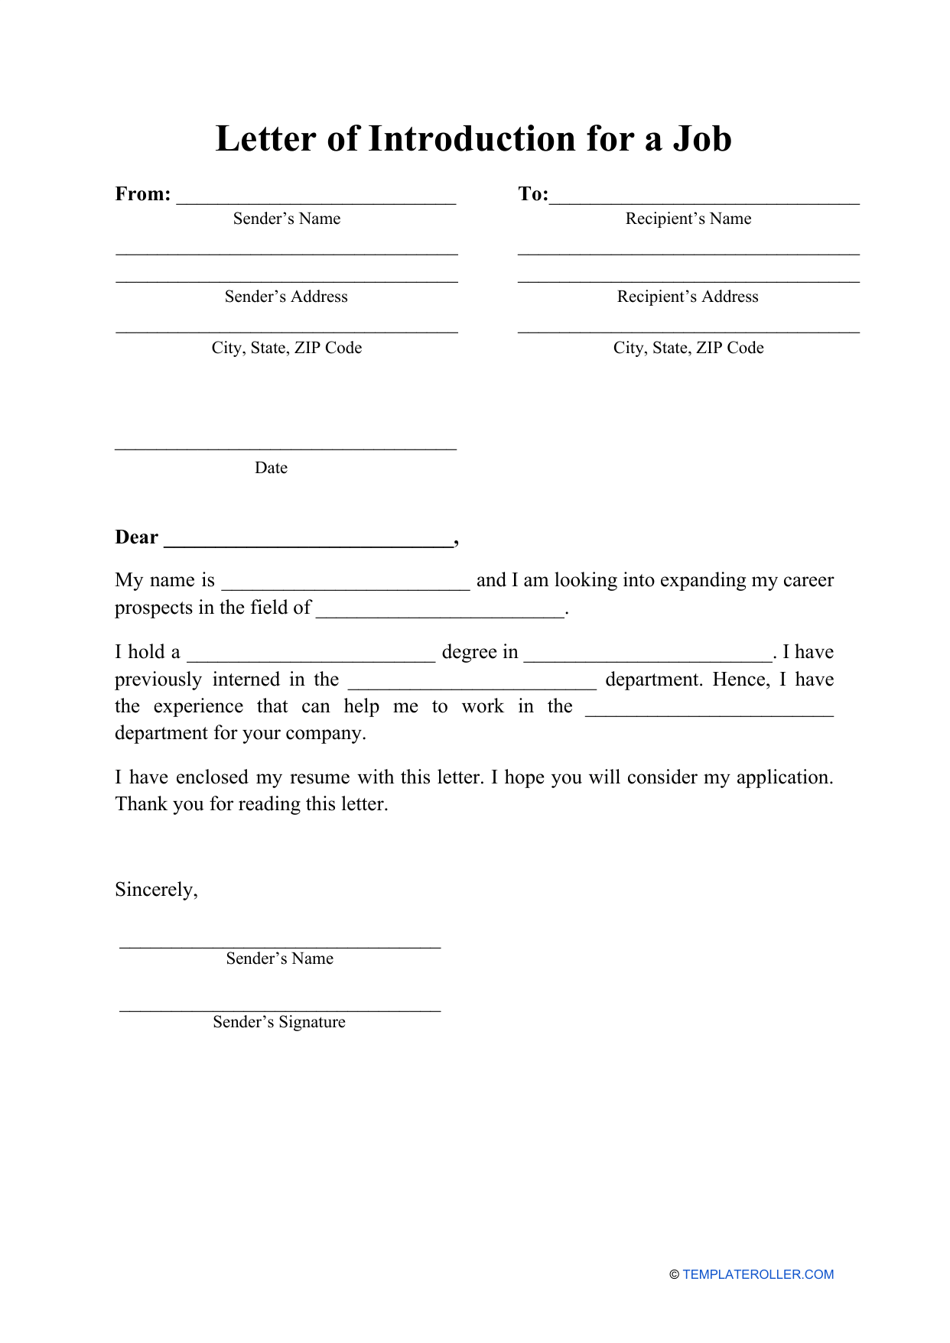 Letter of Introduction for a Job Template - Preview Image